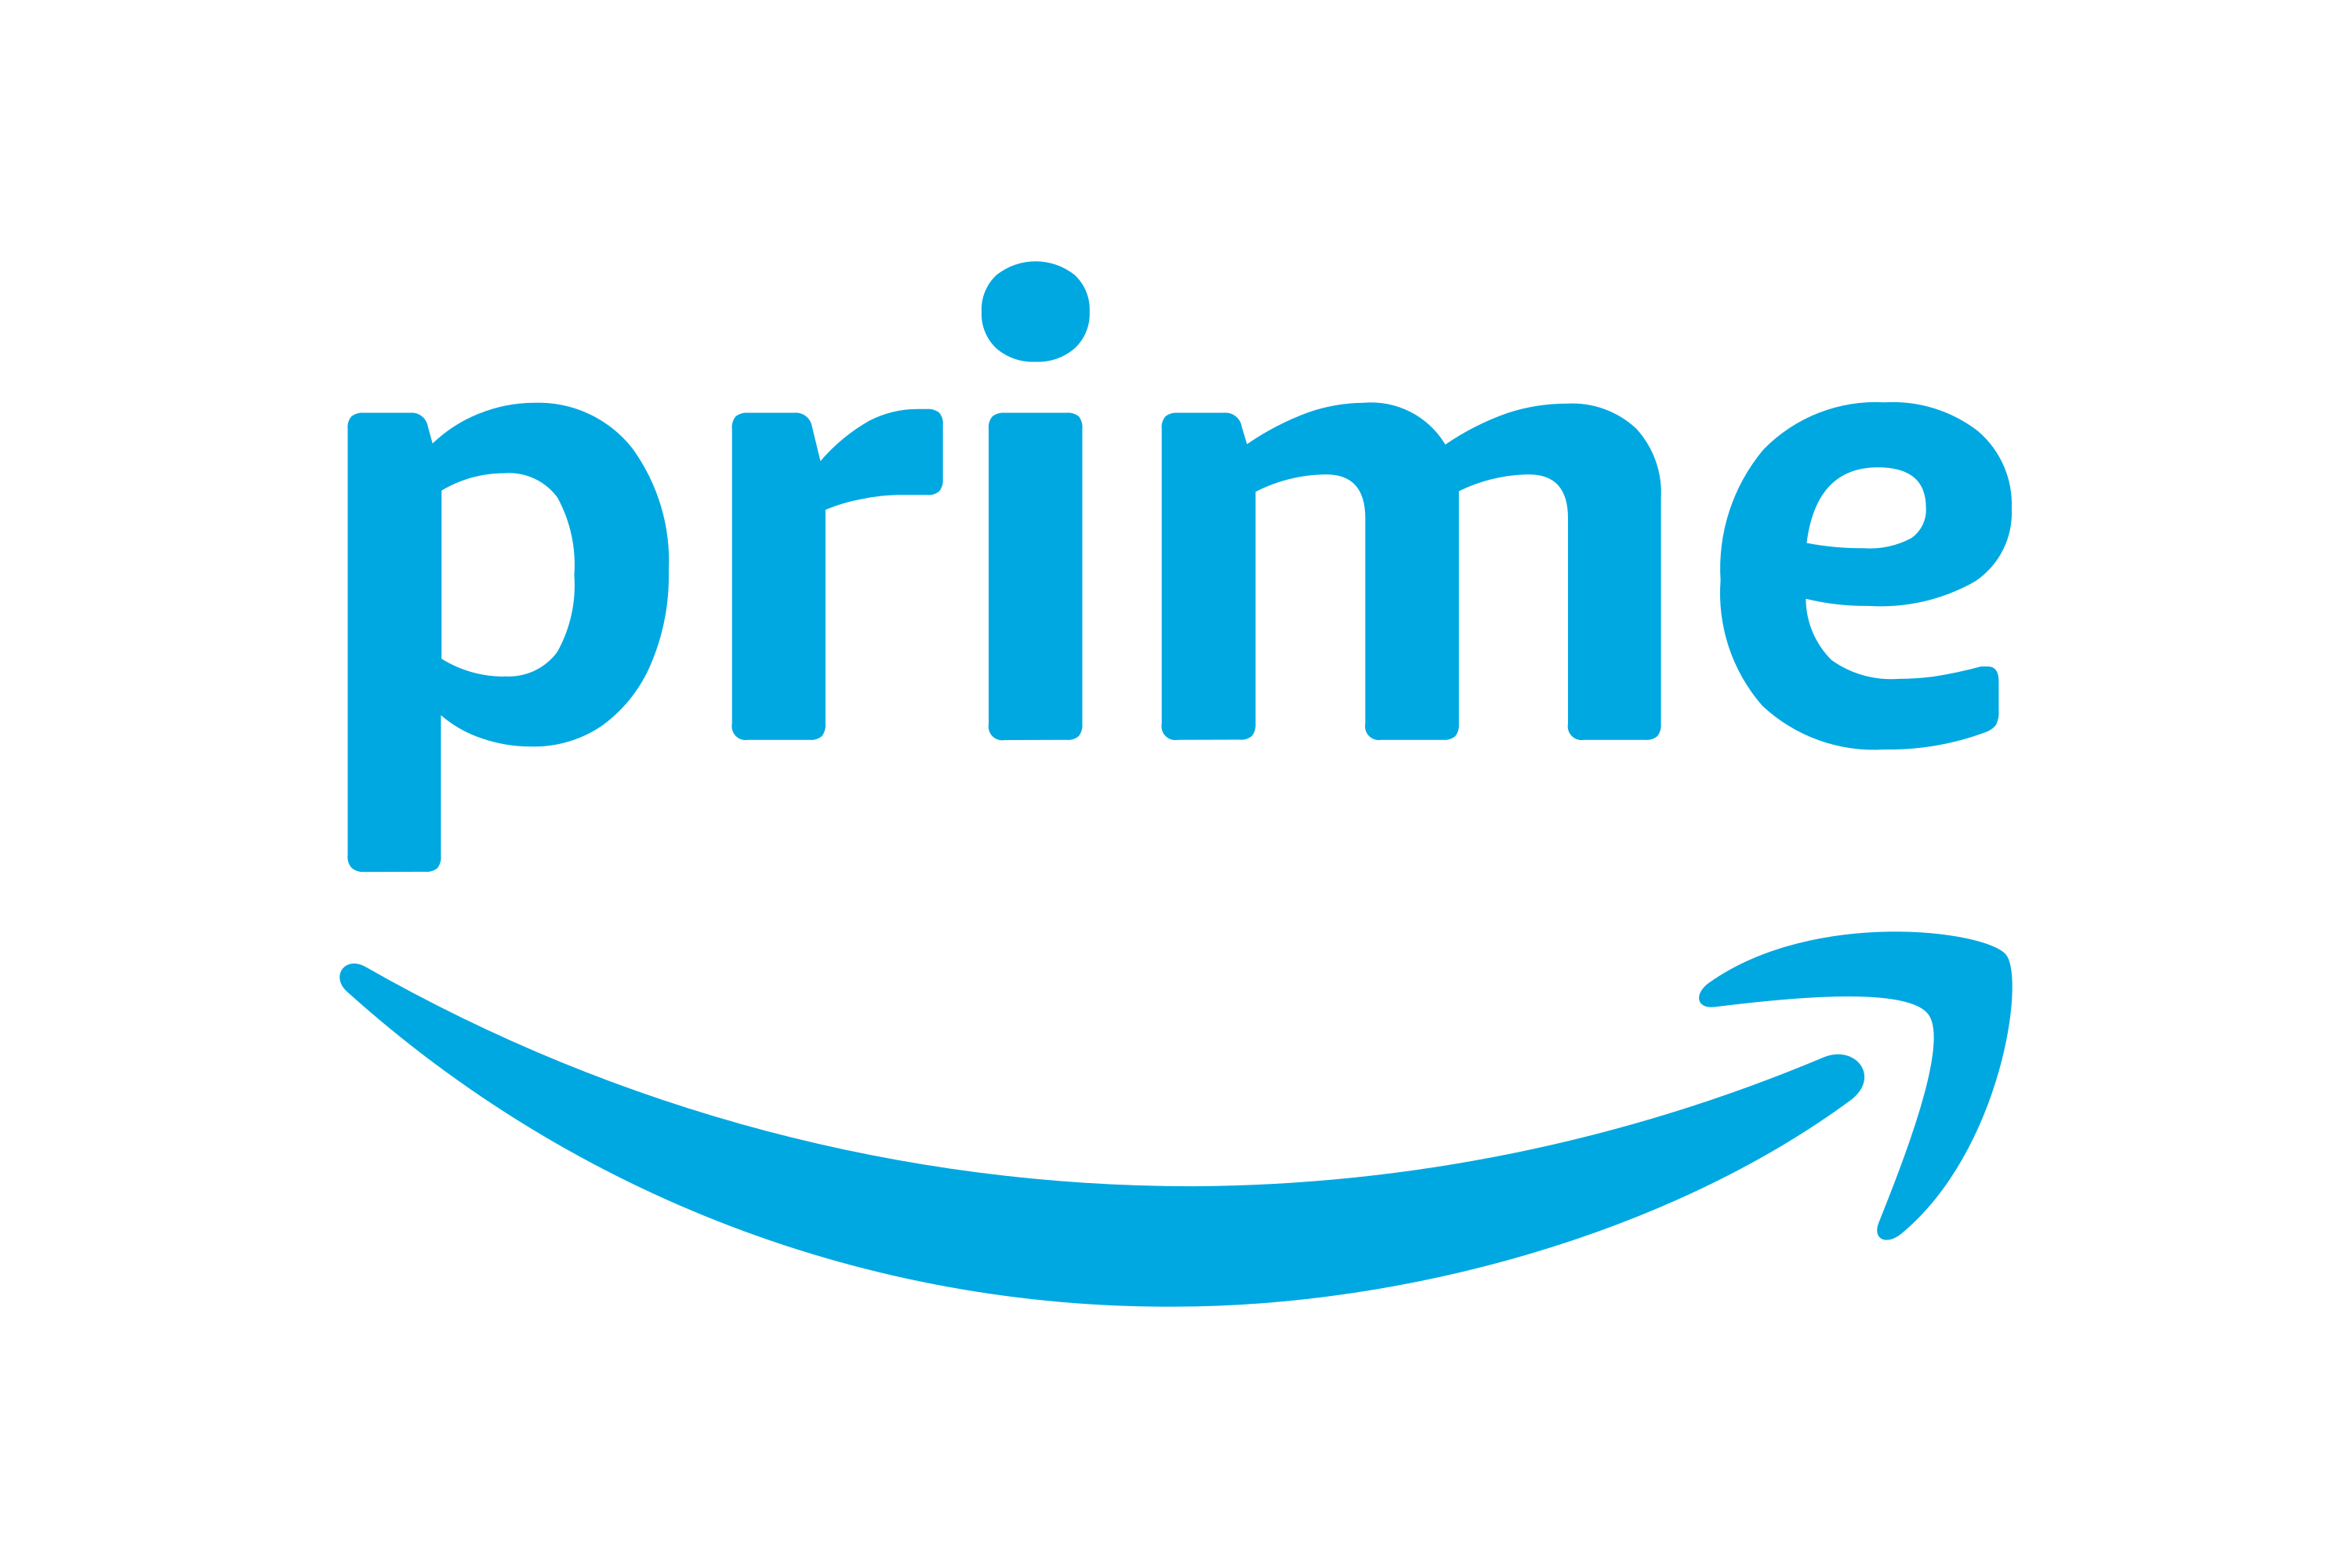 Download Amazon Prime Logo in SVG Vector or PNG File ... - Amazon Logo.svg